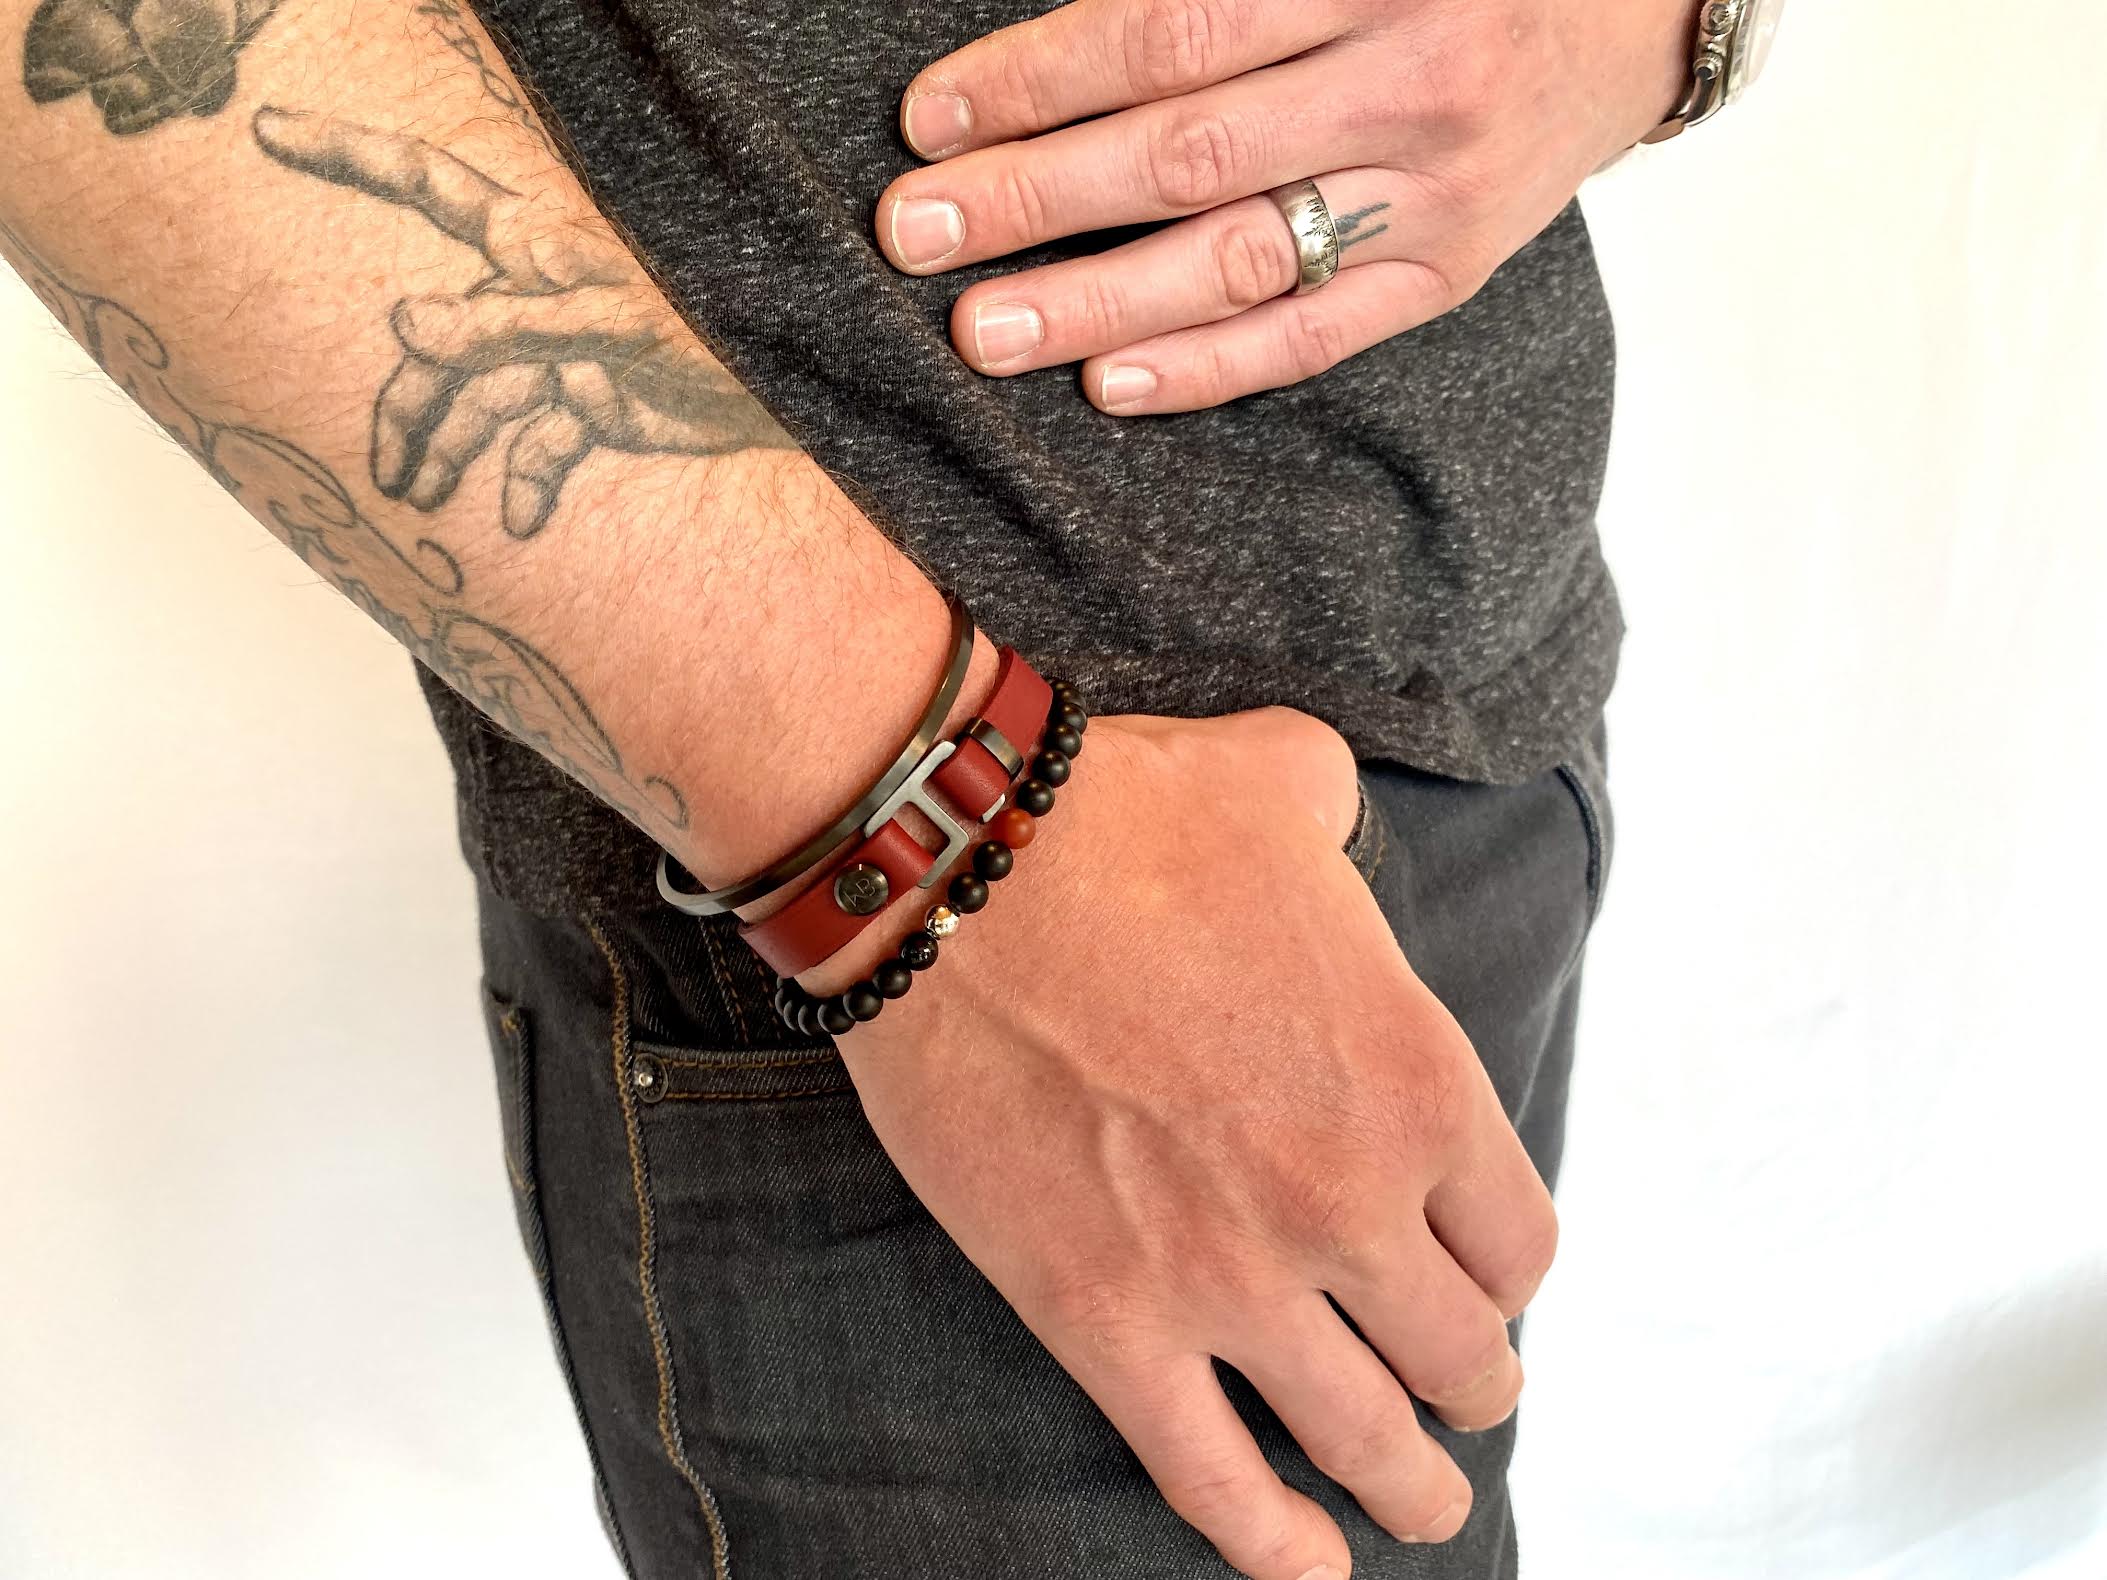 With a trendy, cool modern vibe, this burgundy/black Italian leather cuff bracelet is paired with your choice of brushed stainless steel, brass or black ceramic hardware. Our signature cuff bracelet is a modern staple for your WristBend collection. Made by WristBend